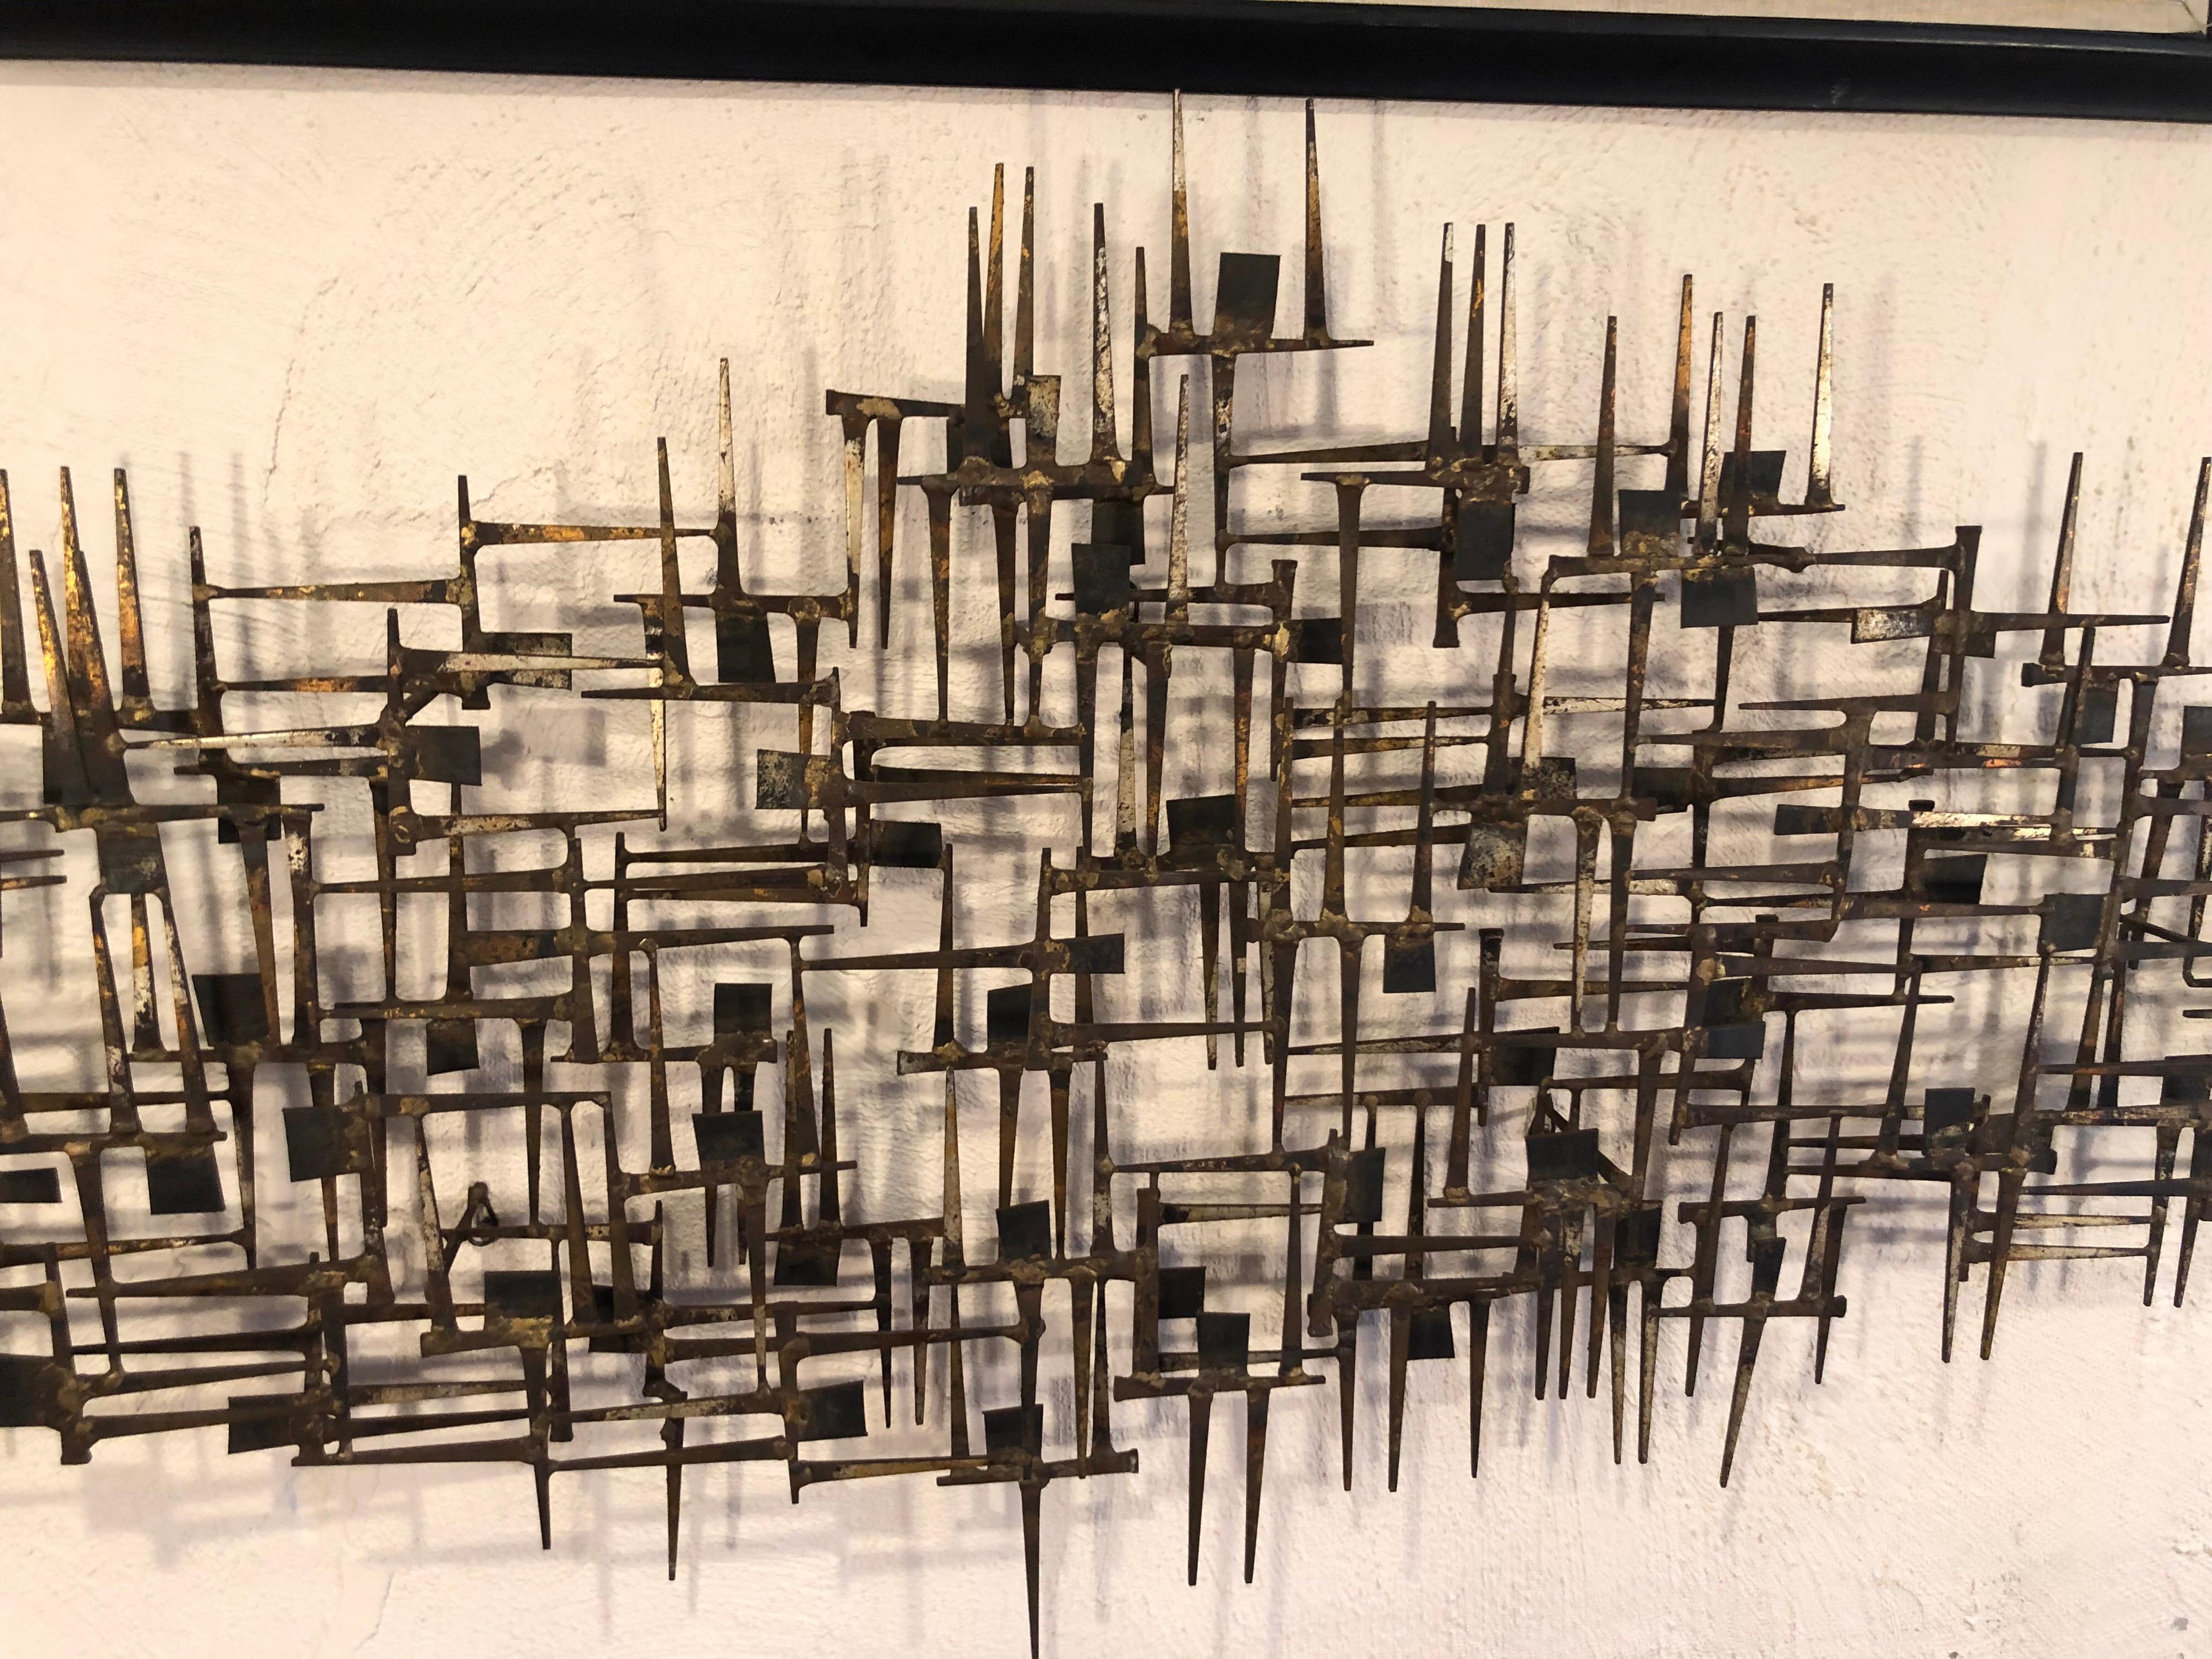 Large Midcentury Brutalist Nail Wall Sculpture Attributed to Weinstein 1